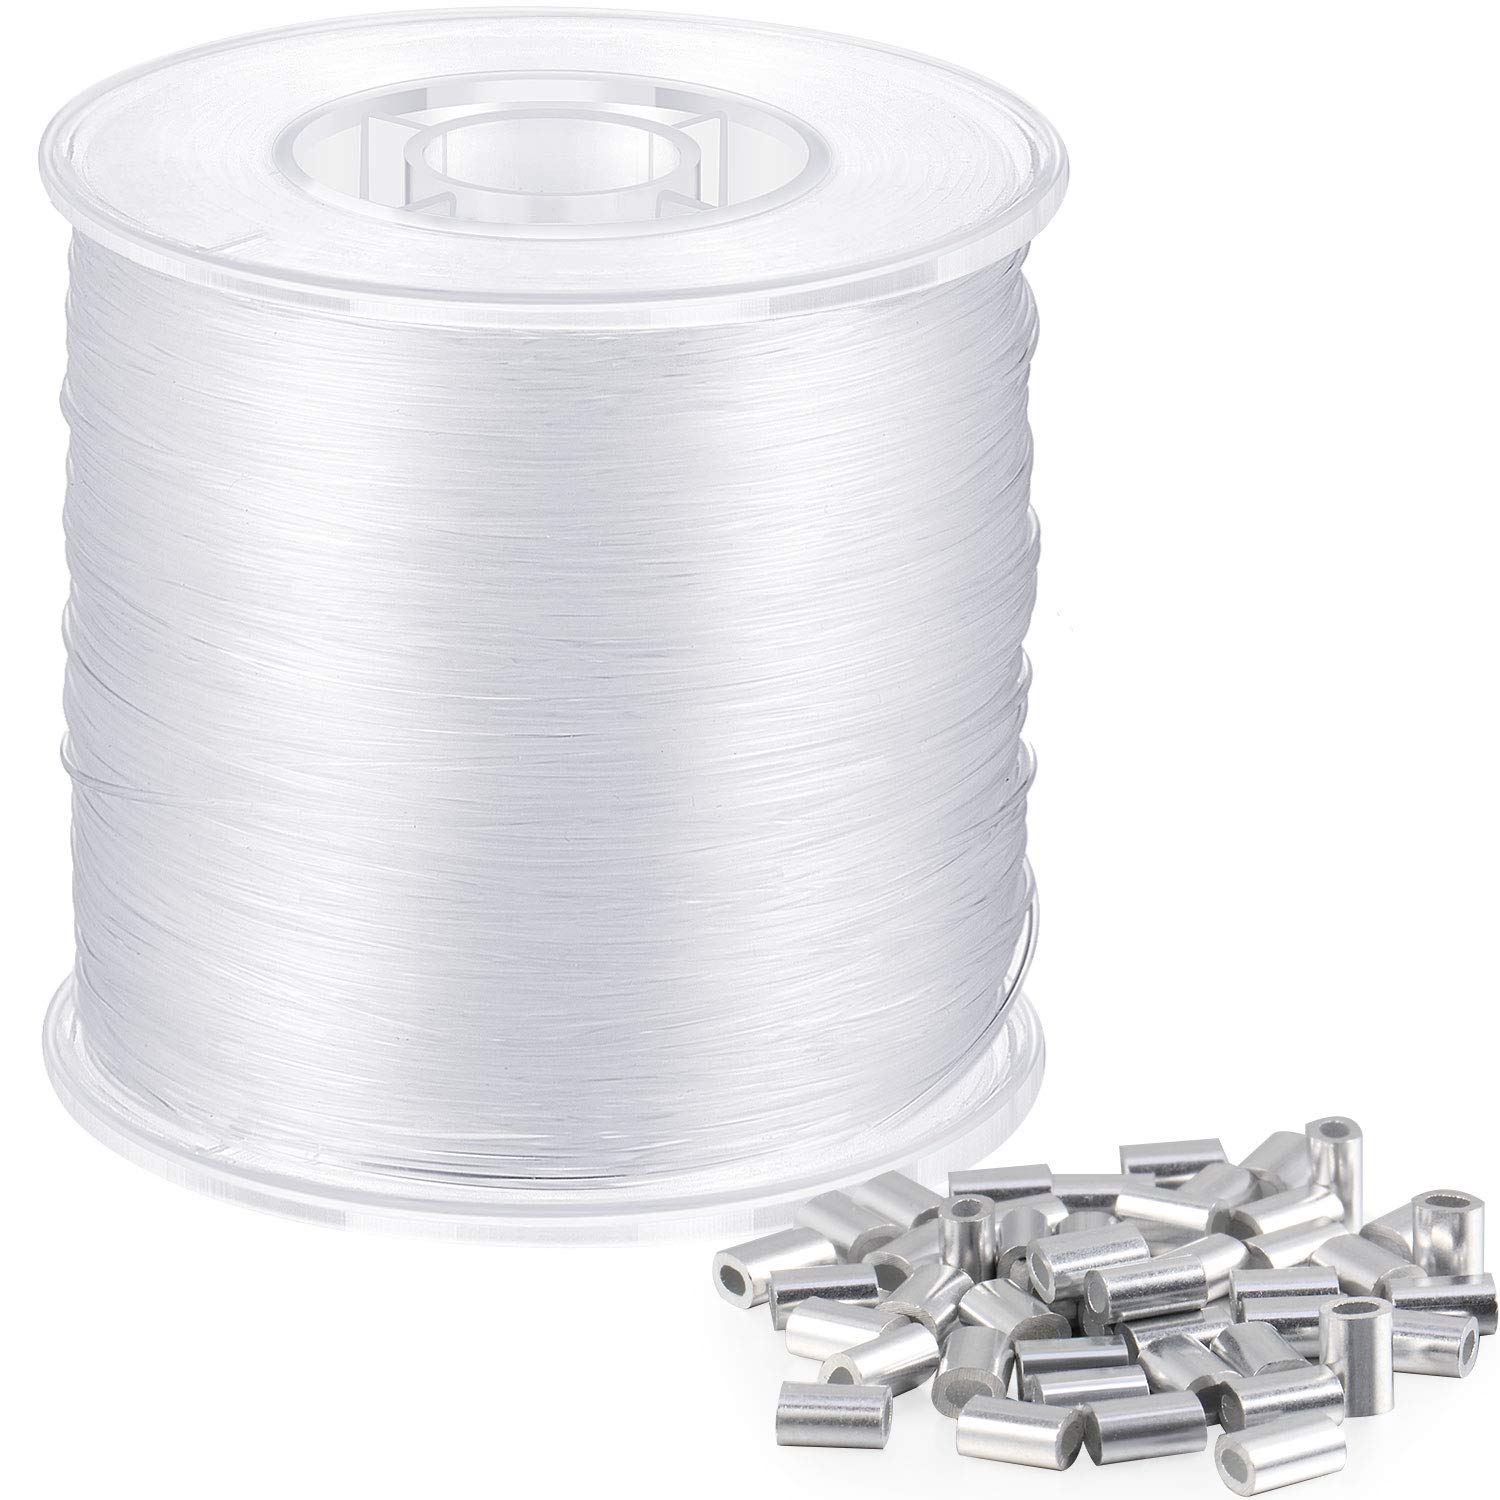 Strong Clear Nylon Fish Wire for Hanging Christmas Decor and 50